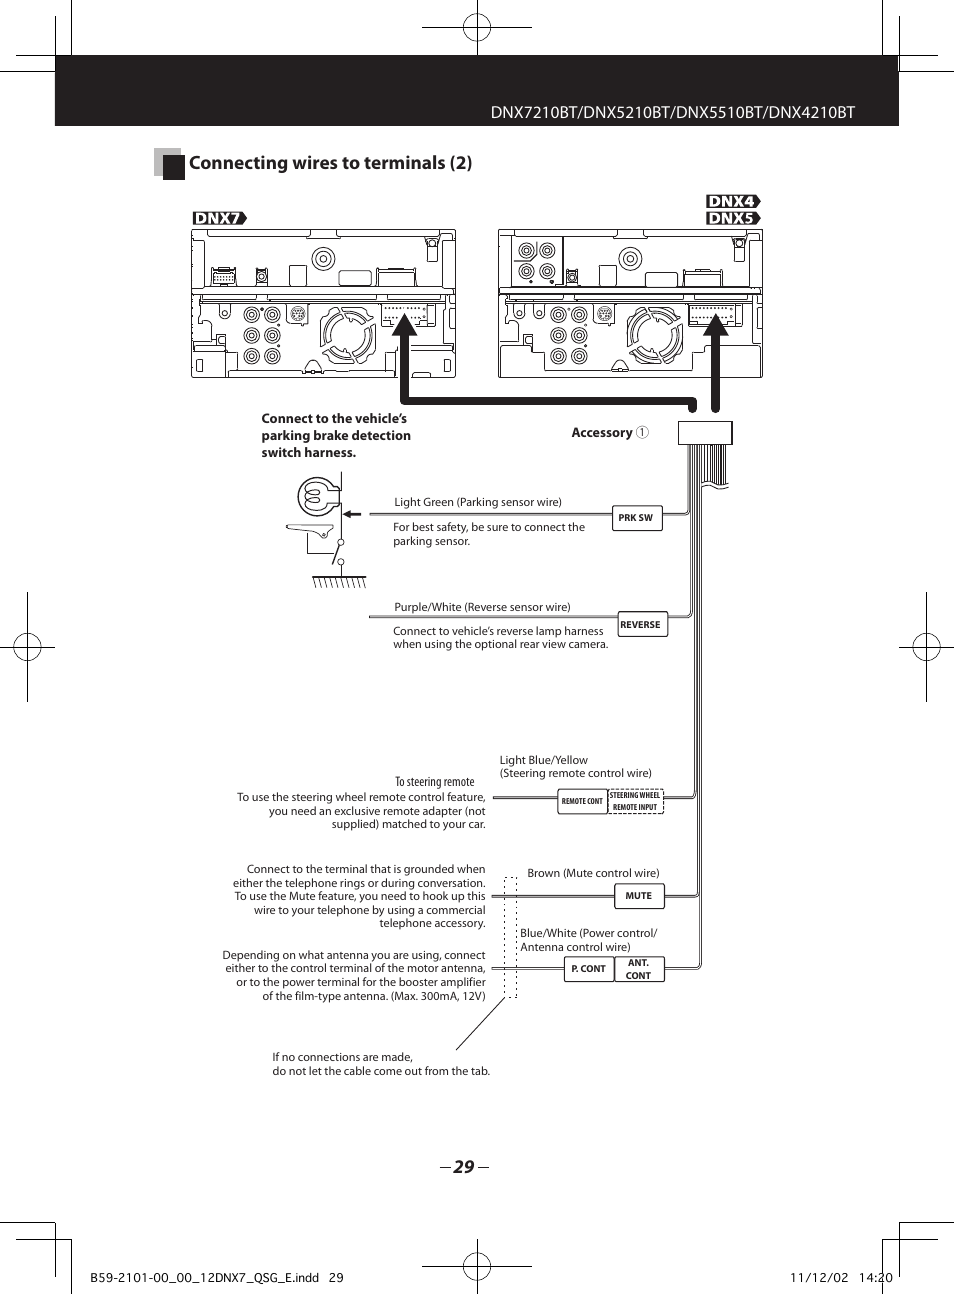 Connecting wires to terminals (2) | Kenwood DNX5210BT User Manual | Page 29  / 36